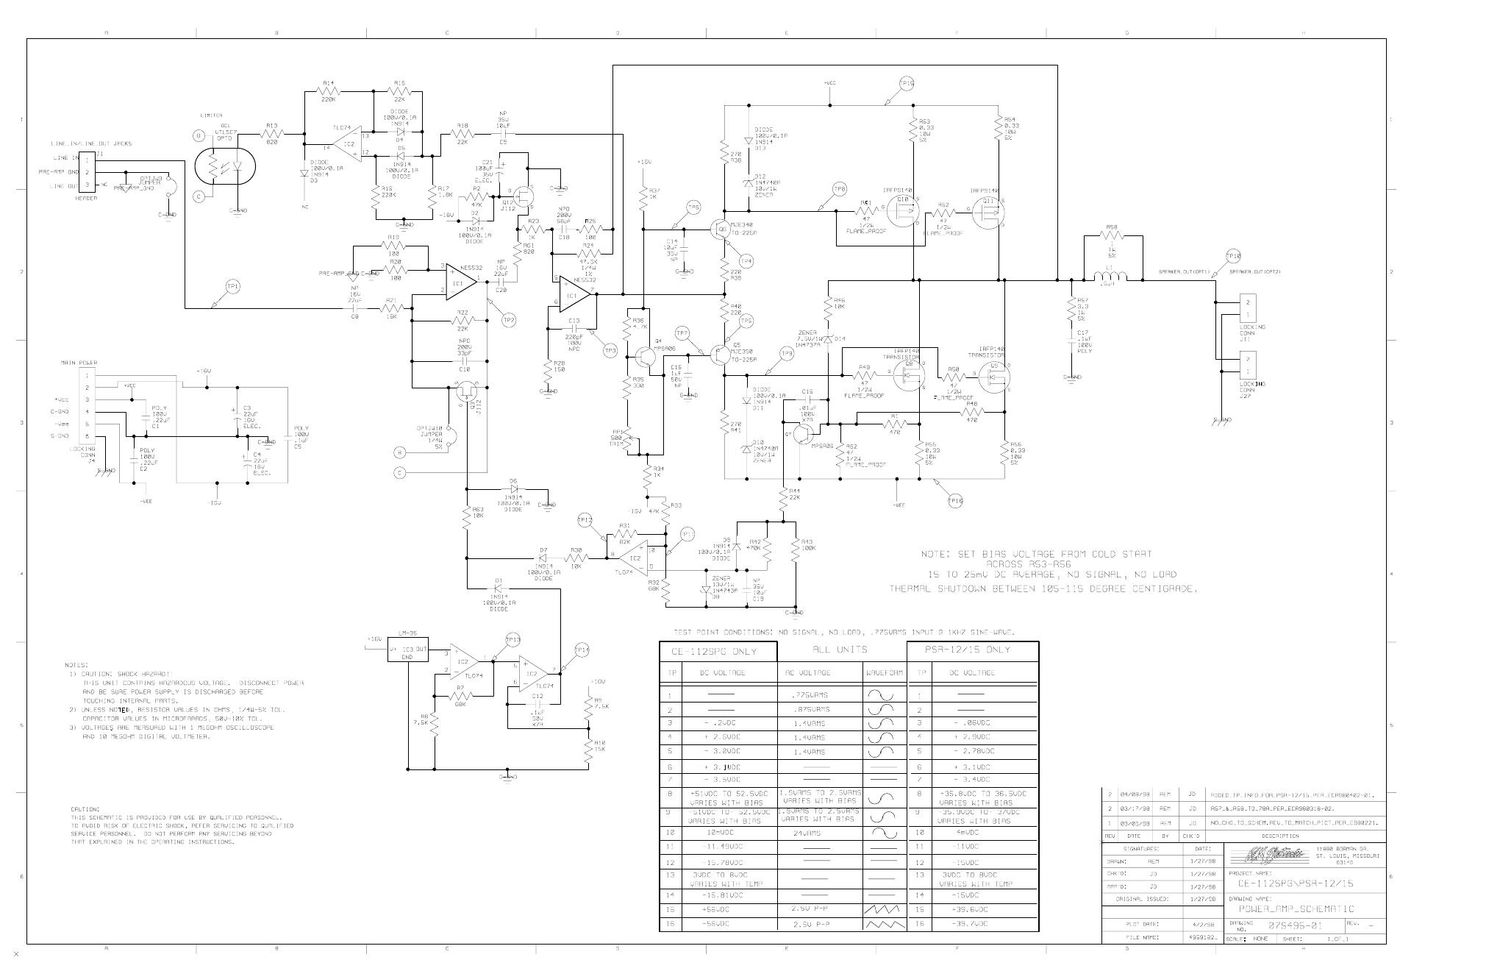 Crate CE 112SPG PSR 12 15 Power Amp 07S495 Schematic